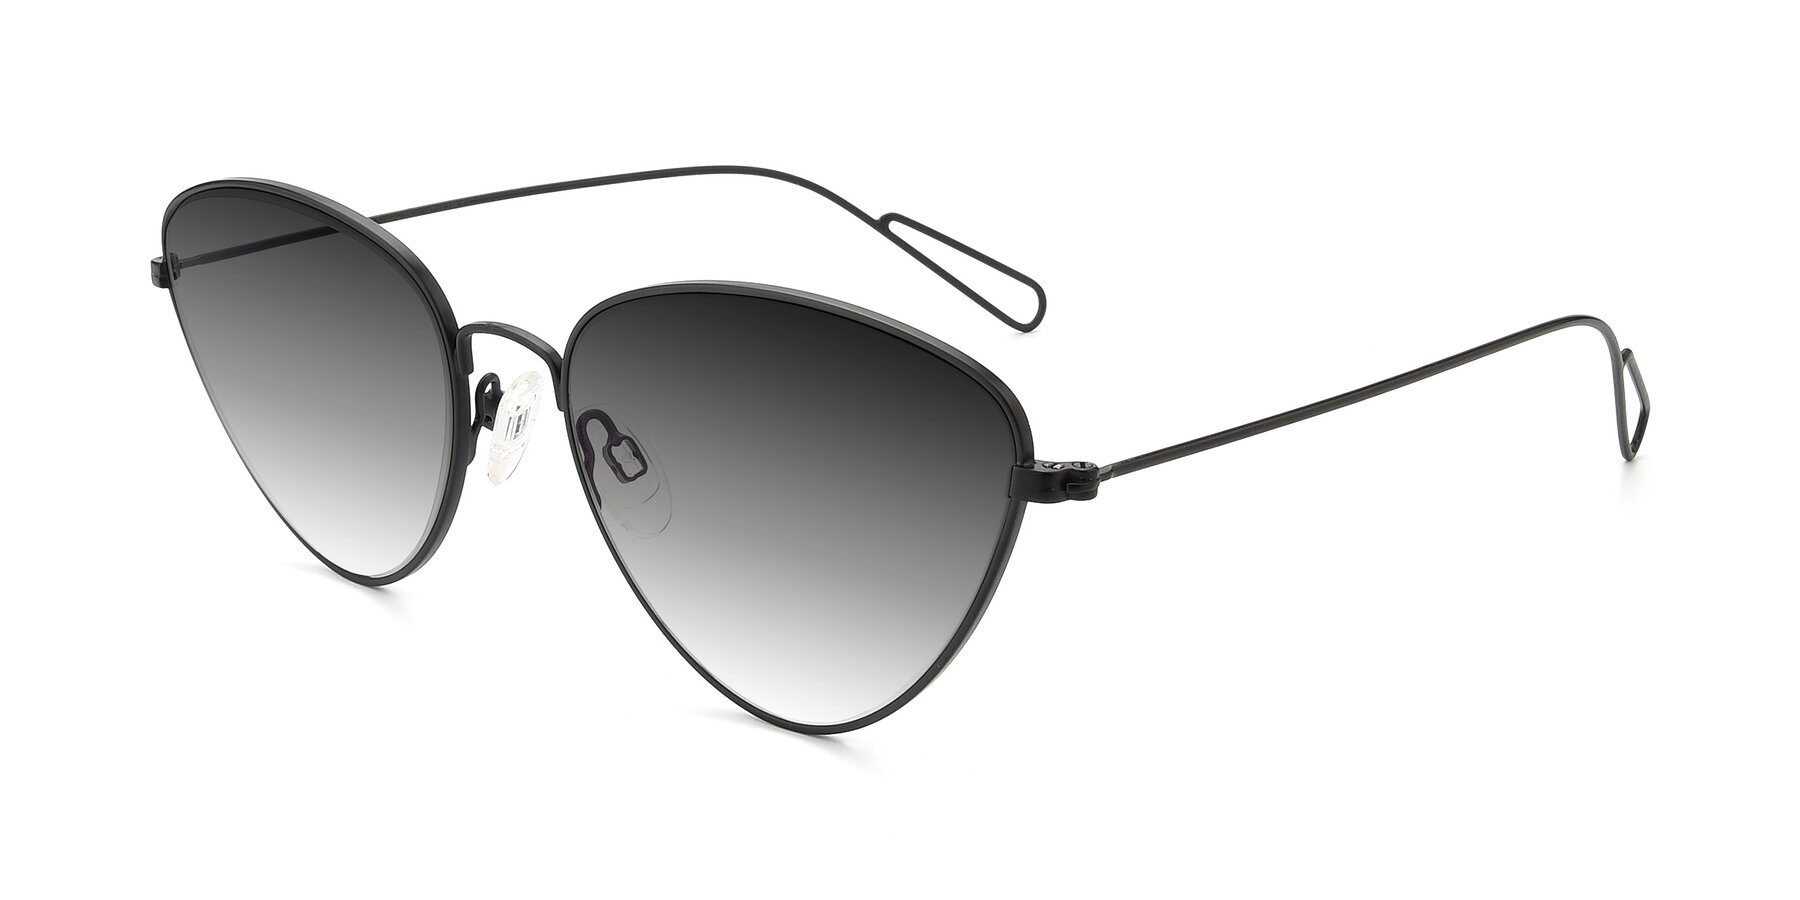 Angle of Butterfly Effect in Black with Gray Gradient Lenses